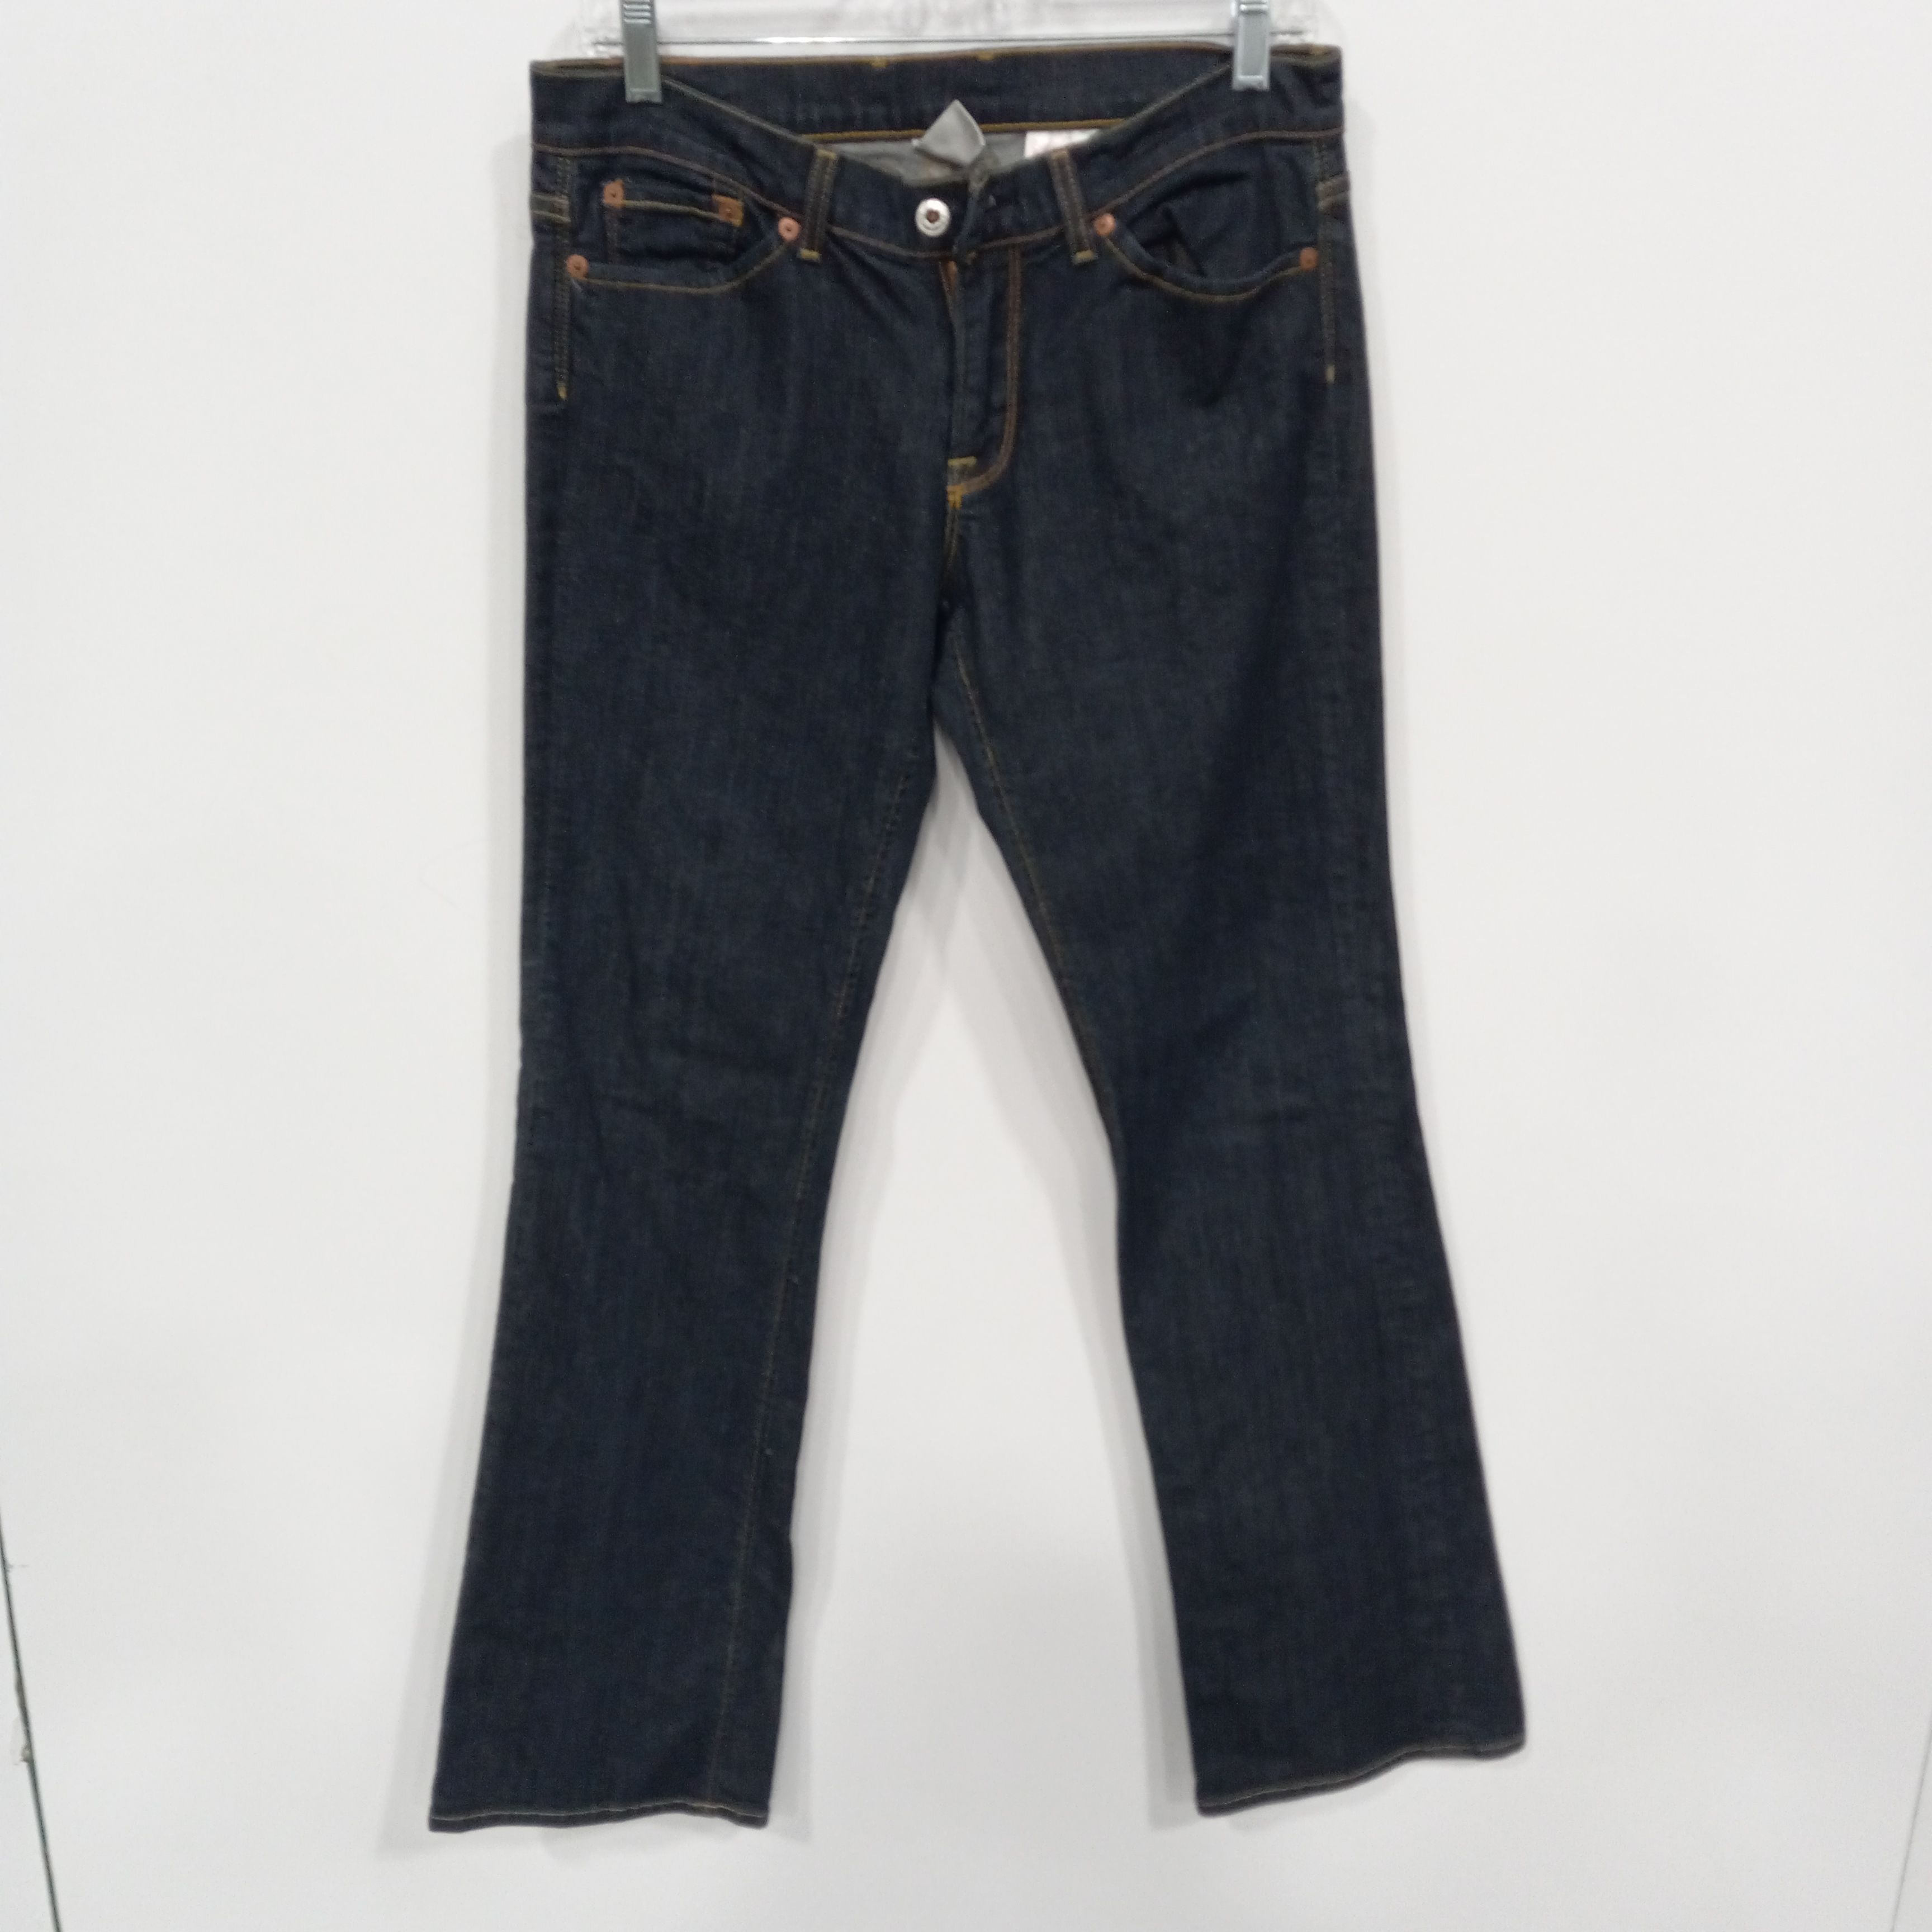 Lucky Brand Dungarees jeans – Thriller